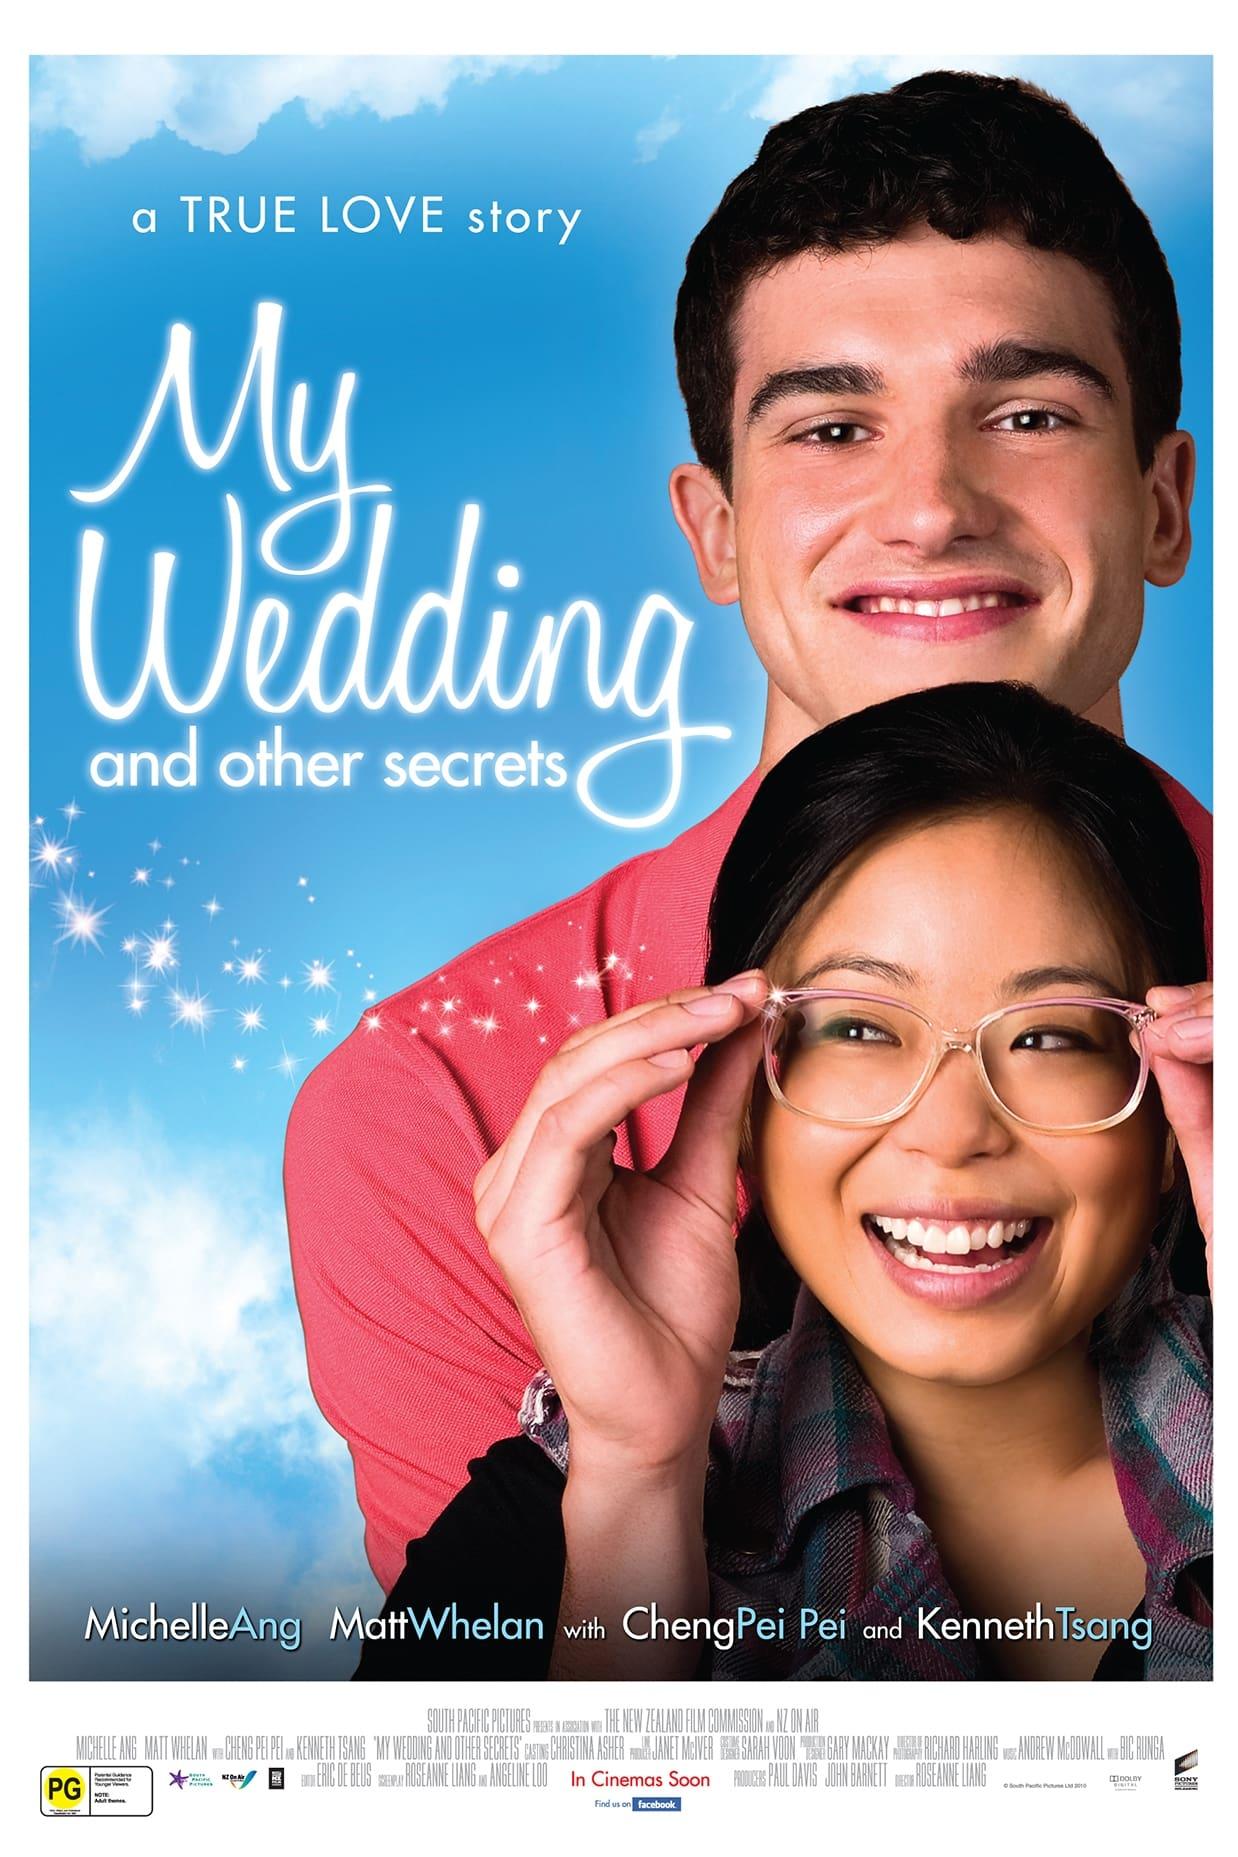 My Wedding and Other Secrets poster